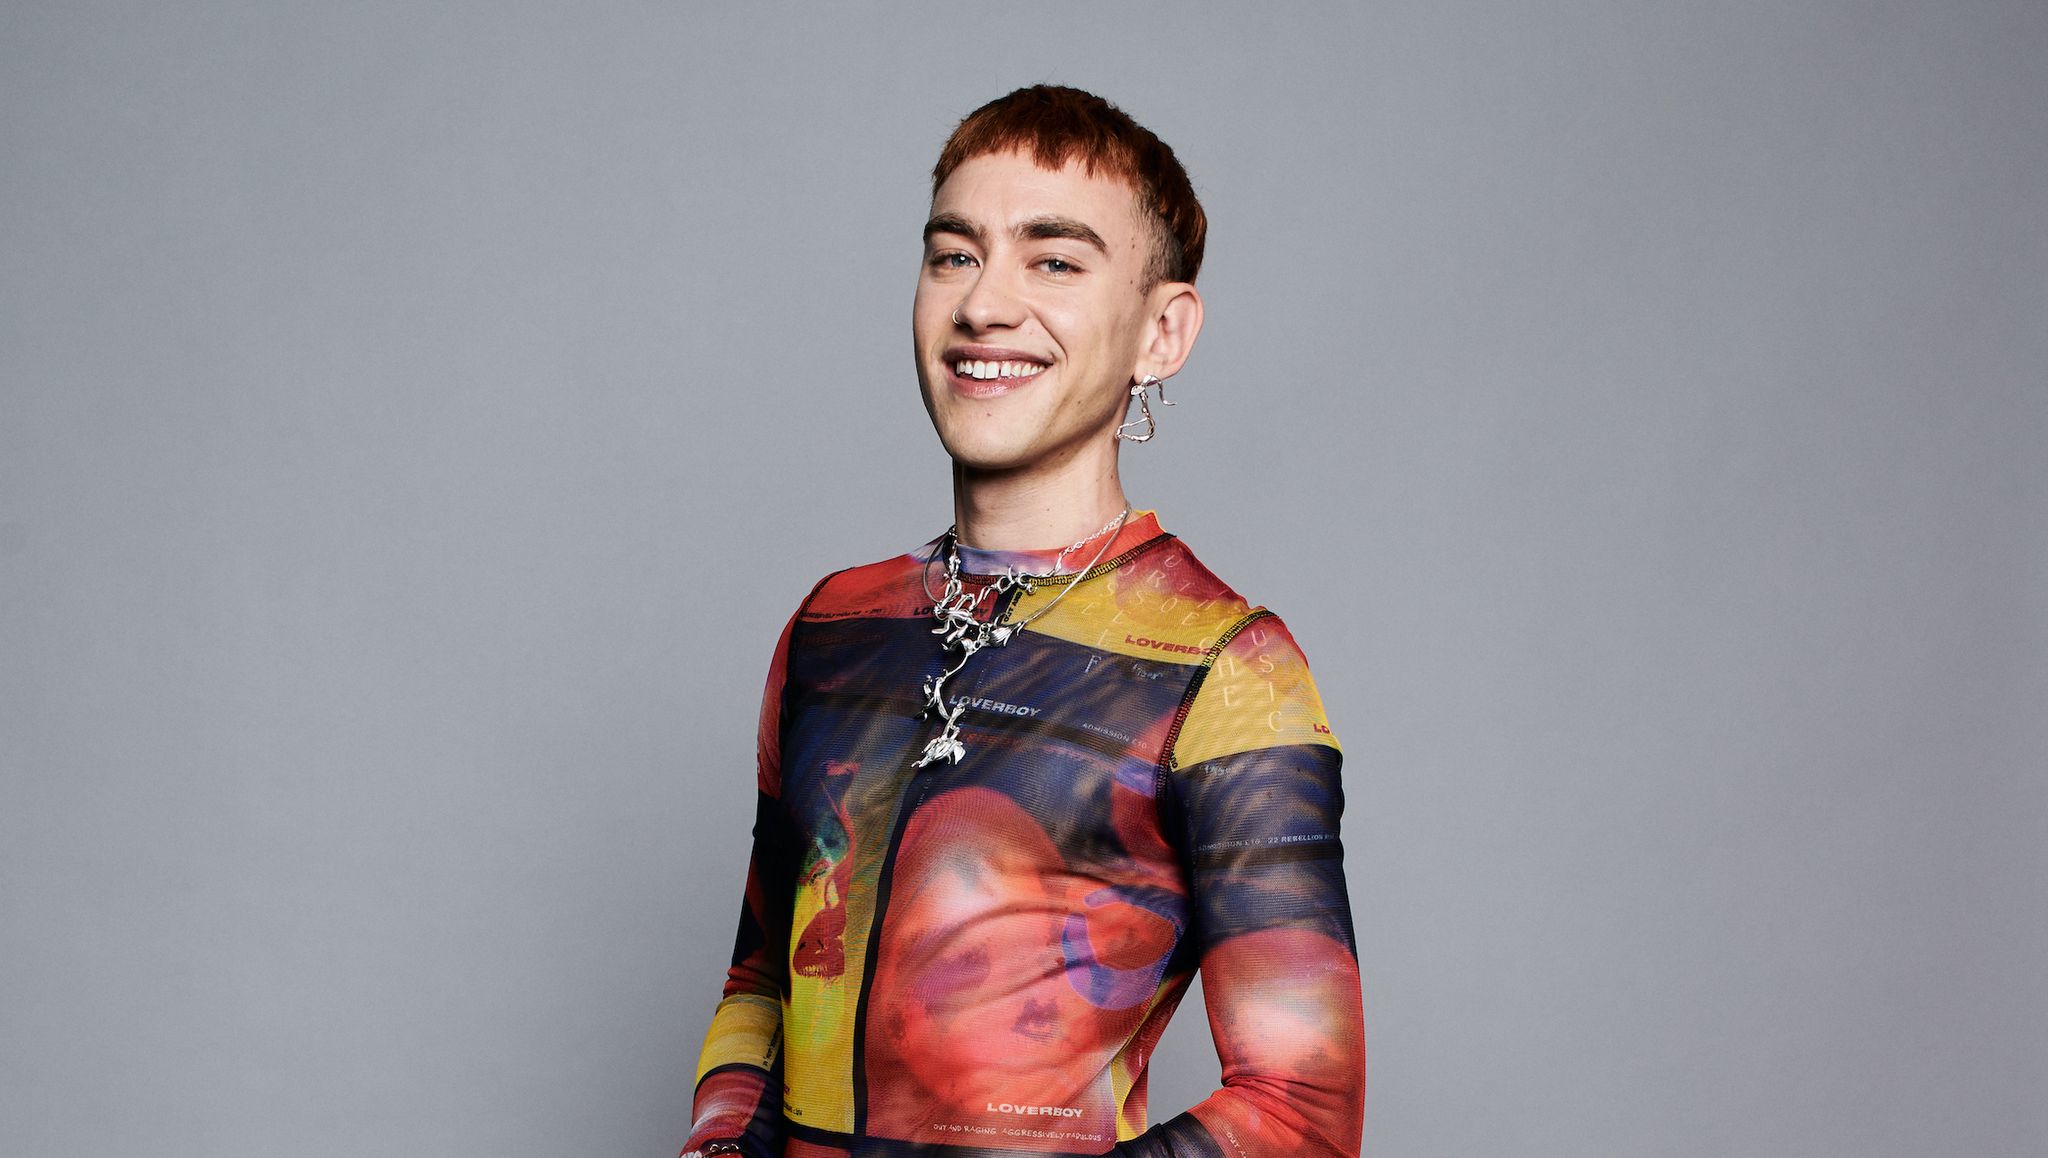 budapest, hungary november 14 editors note image has been digitally manipulated olly alexander poses during a portrait session at the mtv emas 2021 'music for all' at the papp laszlo budapest sports arena on november 14, 2021 in budapest, hungary photo by gareth cattermole mtvgetty images for mtv